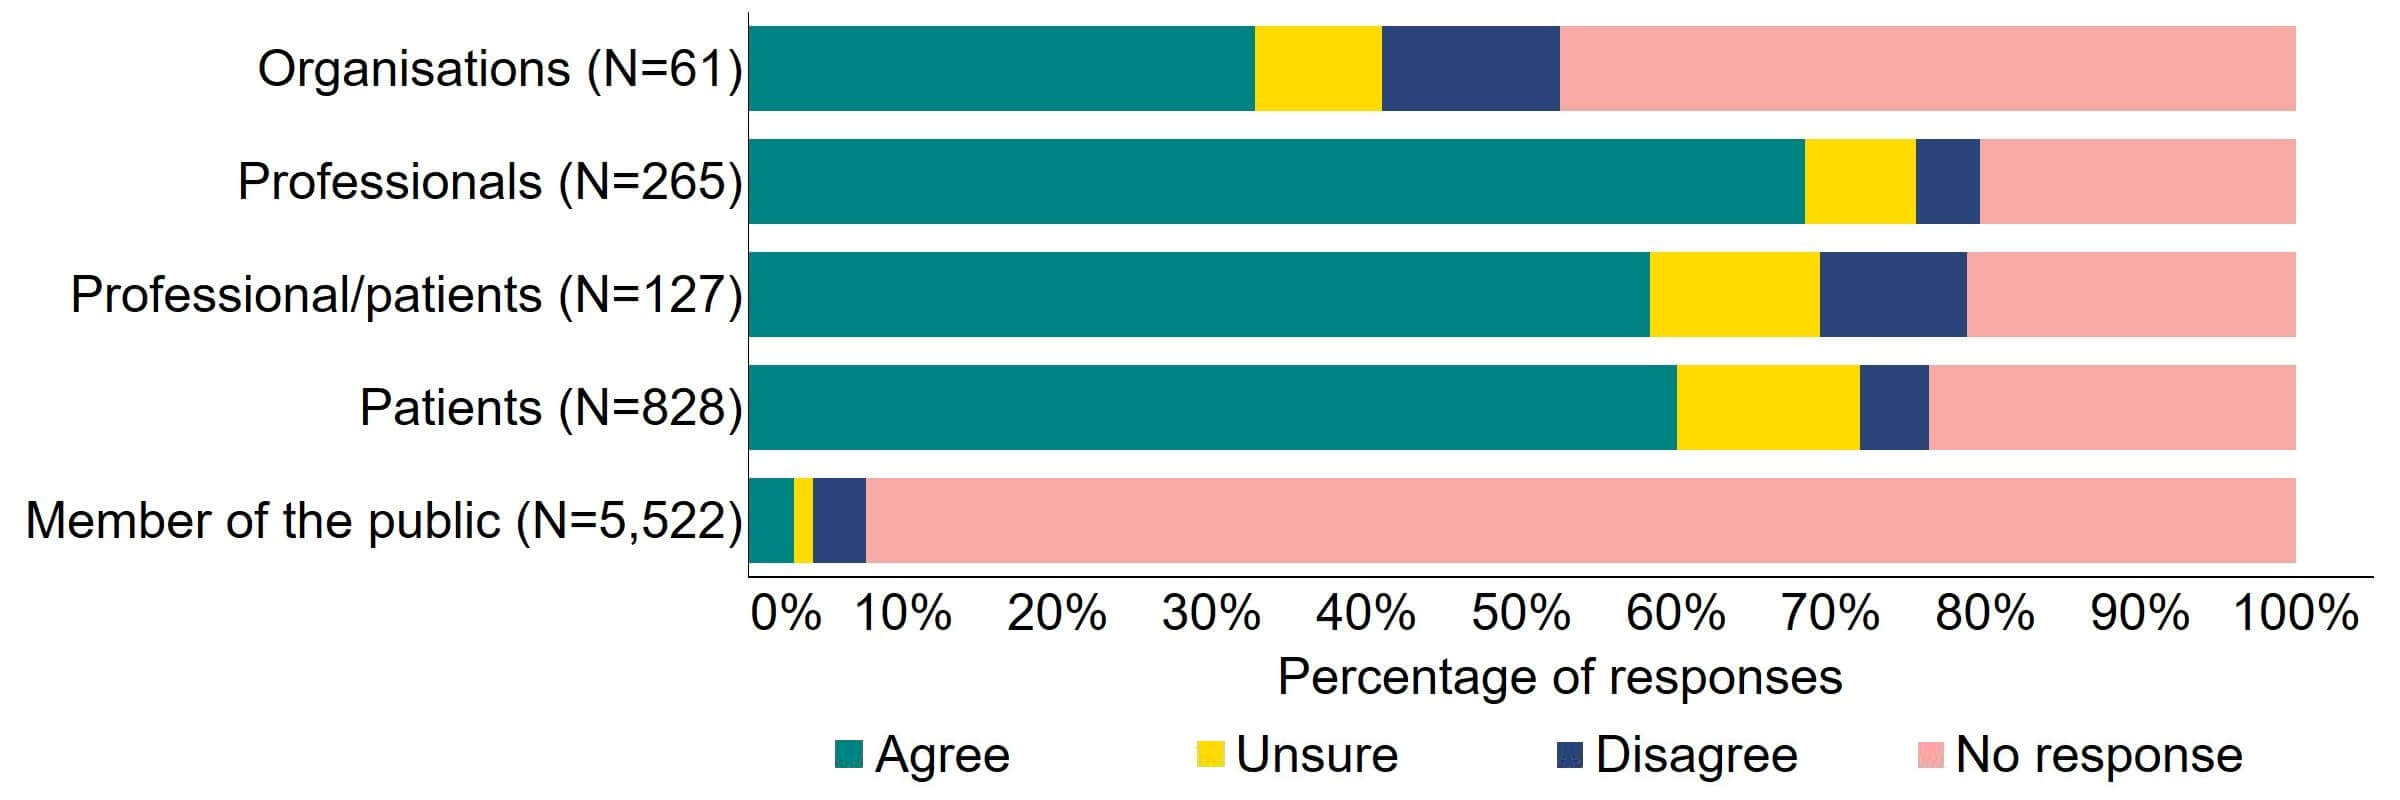 Figure 2 is a stacked bar chart showing the proportion of respondents in each response group who agreed, disagreed, were unsure, or who did not provide a response to the proposal. The underlying data can be downloaded as an Excel worksheet at the top of the page.